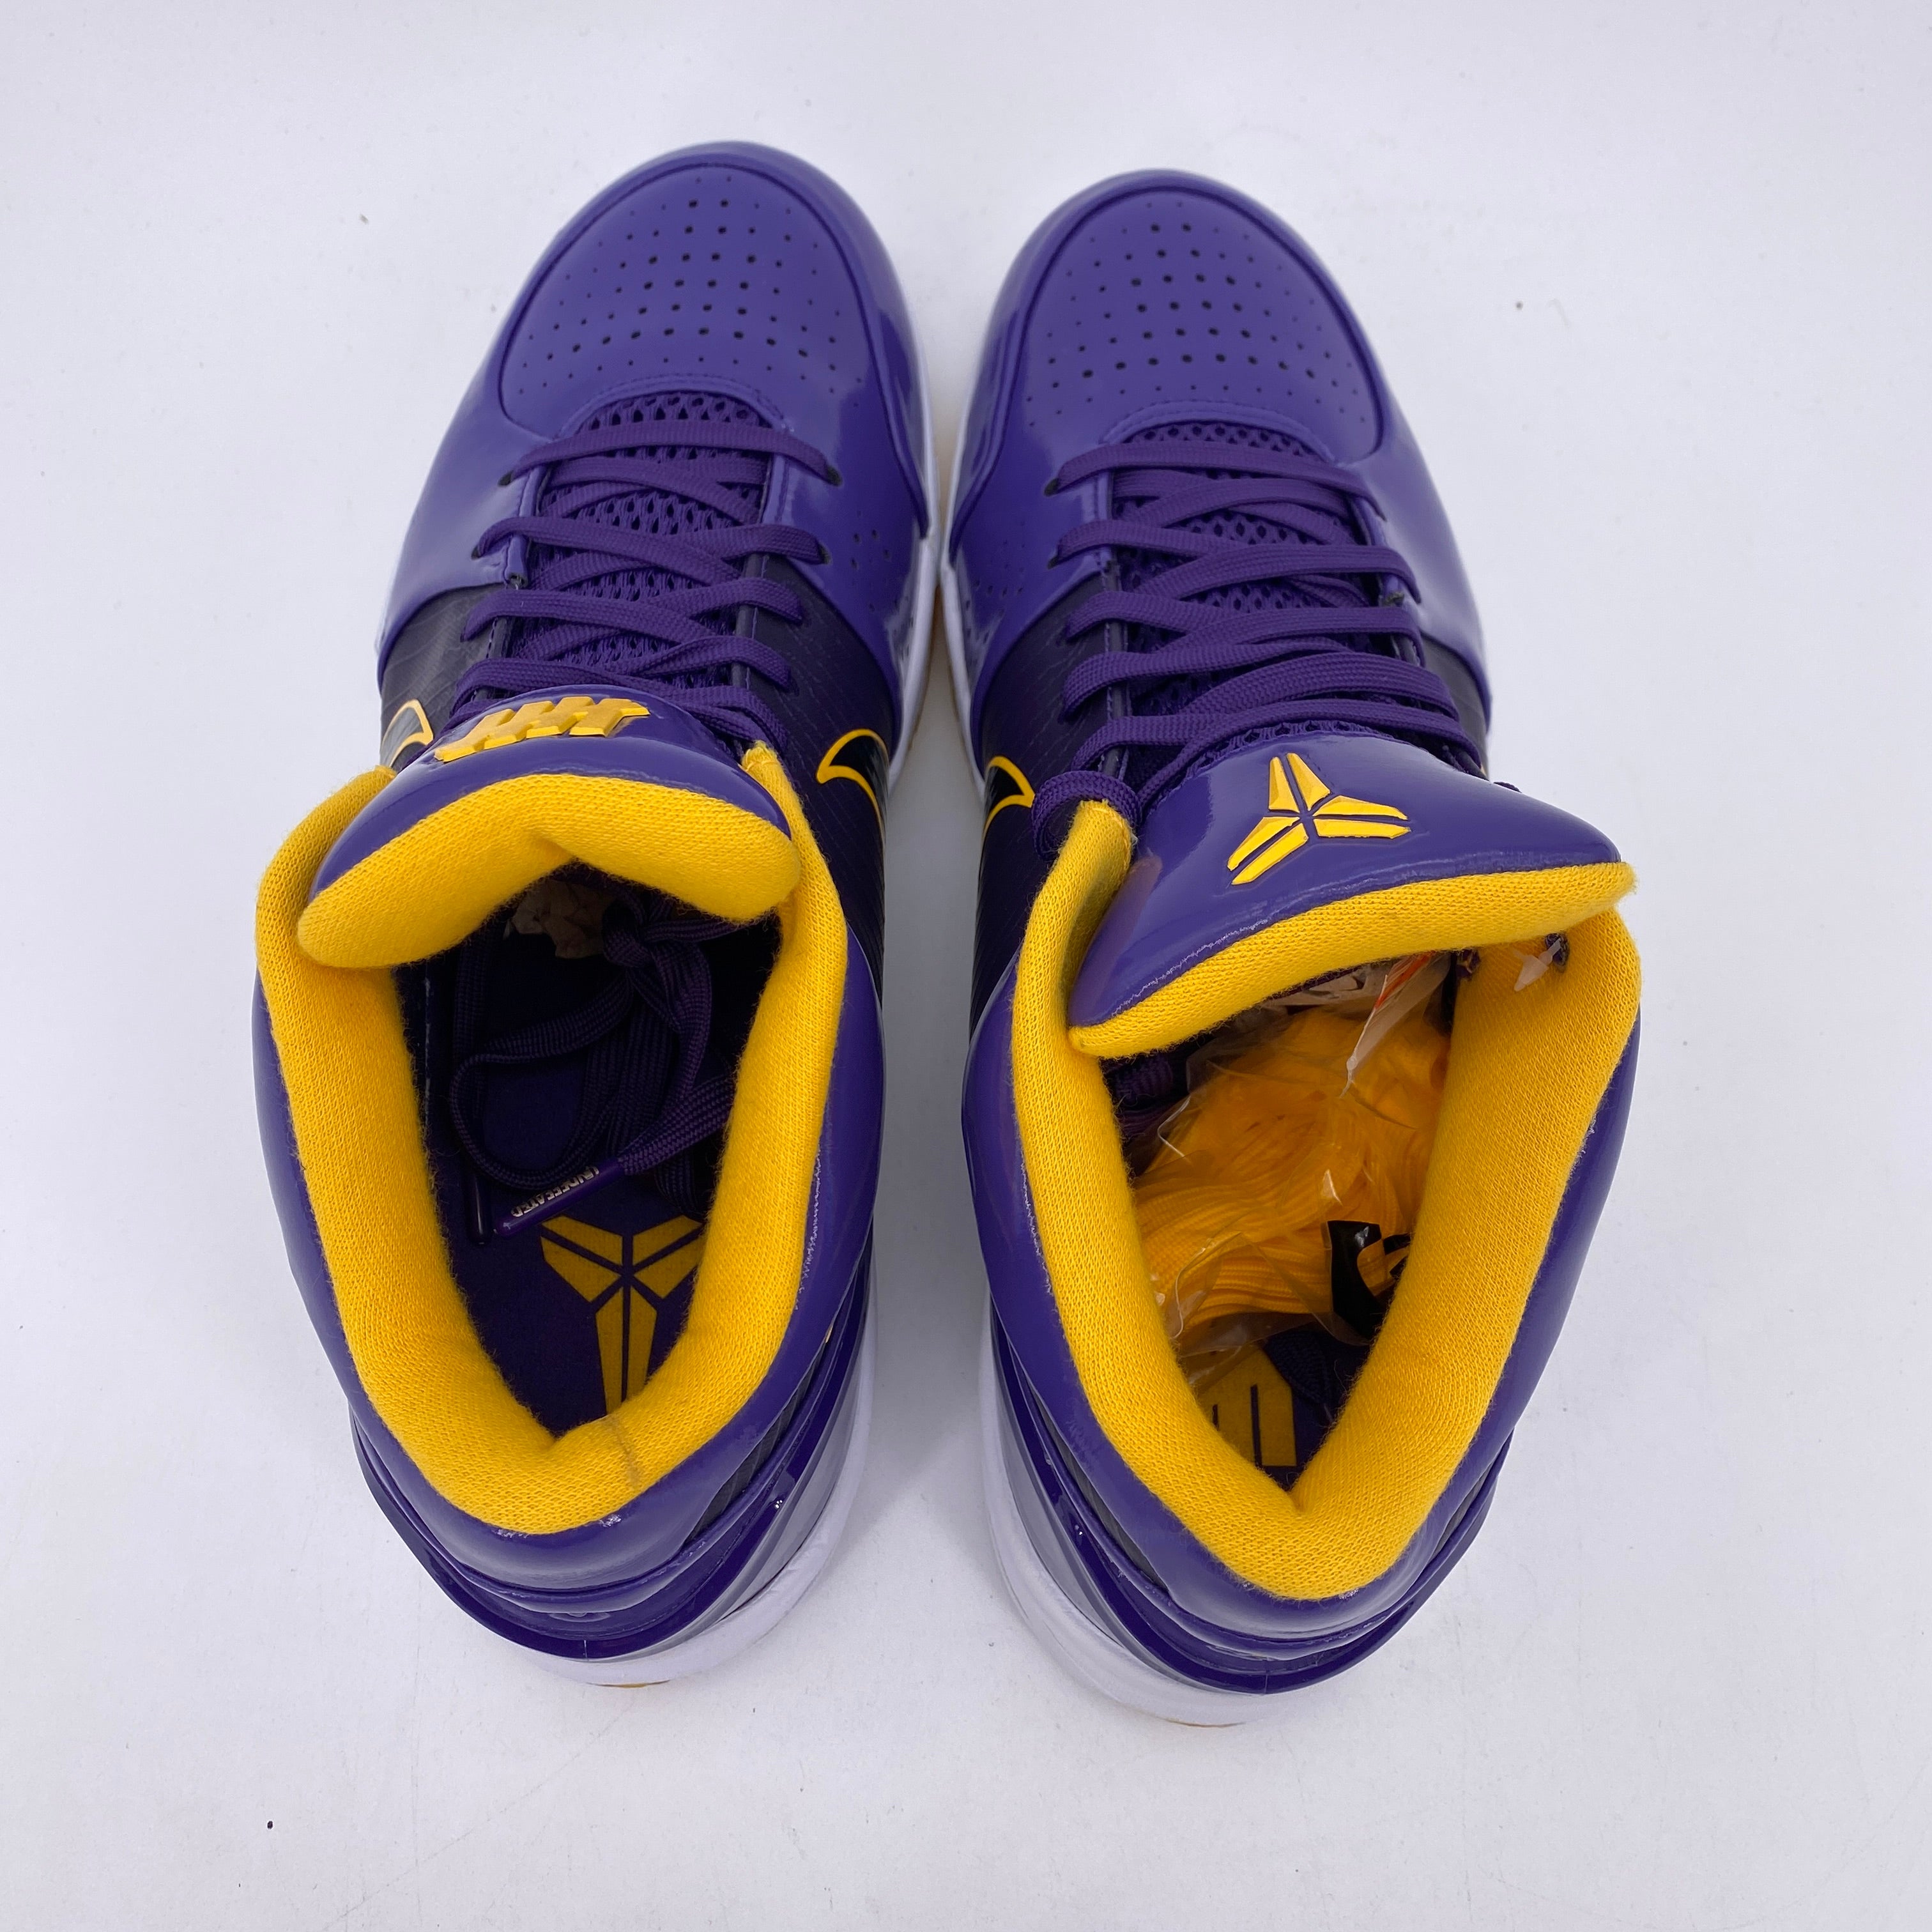 Nike Kobe 4 Protro &quot;Undftd Lakers&quot; 2019 New Size 10